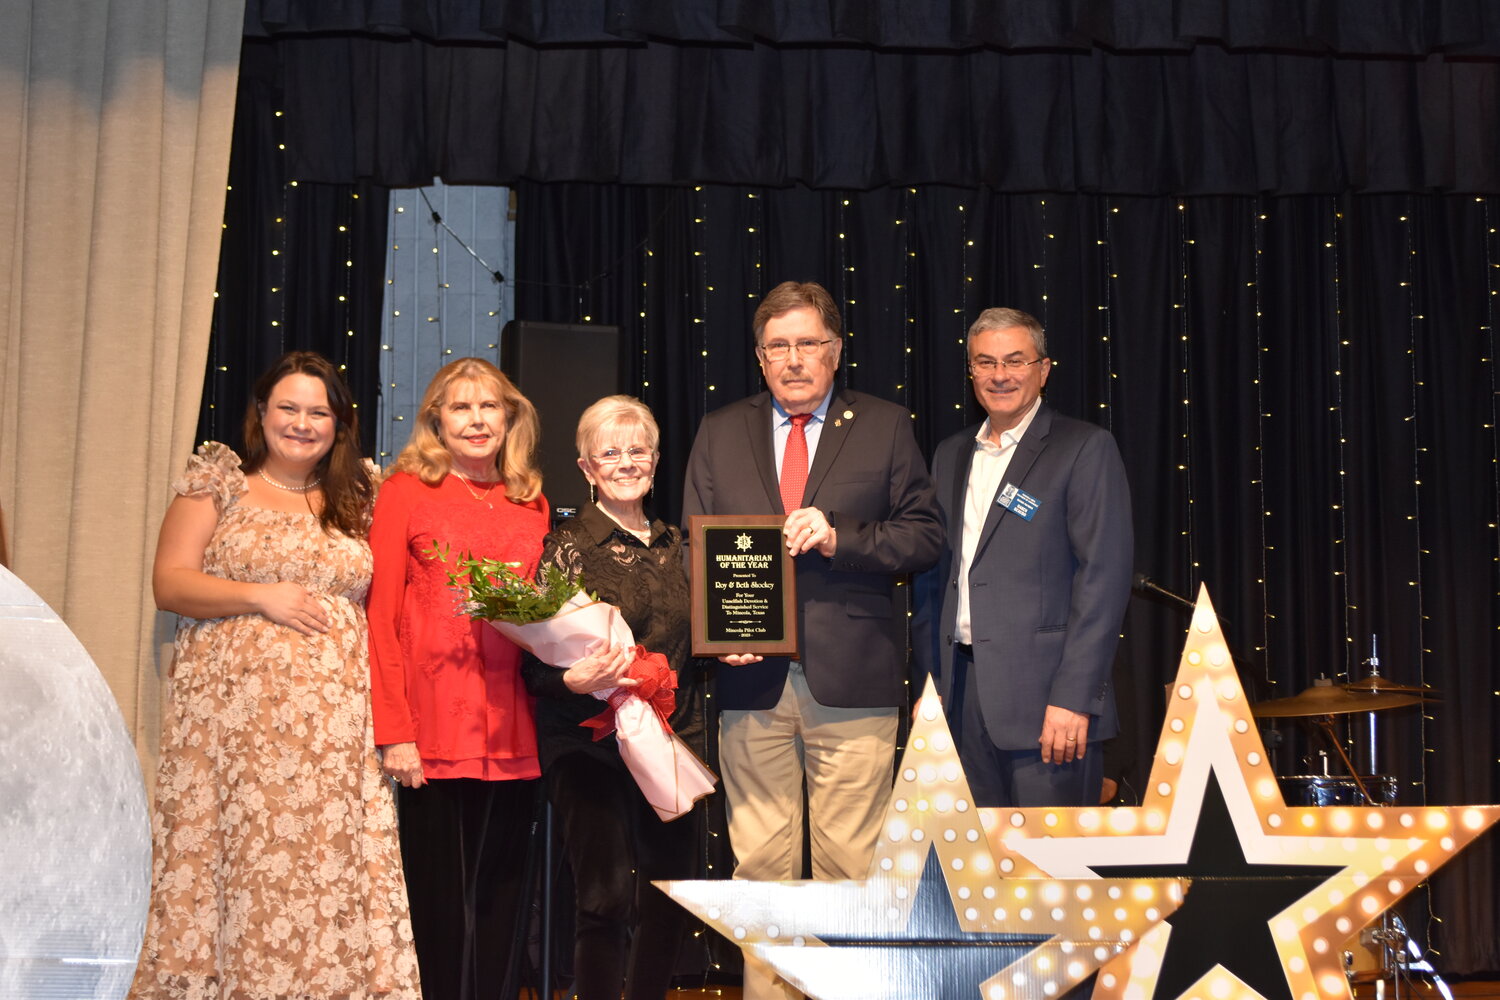 Beth and Roy Shockey earned the Humamnitarian of the Year award at the annual Mineola Chamber banquet last week. From left are Chamber President Kelsie McGilvray, Pilot Club of Mineola presenter Joyce Curry, the Shockeys and Chamber Vice President Daren Beaudo.